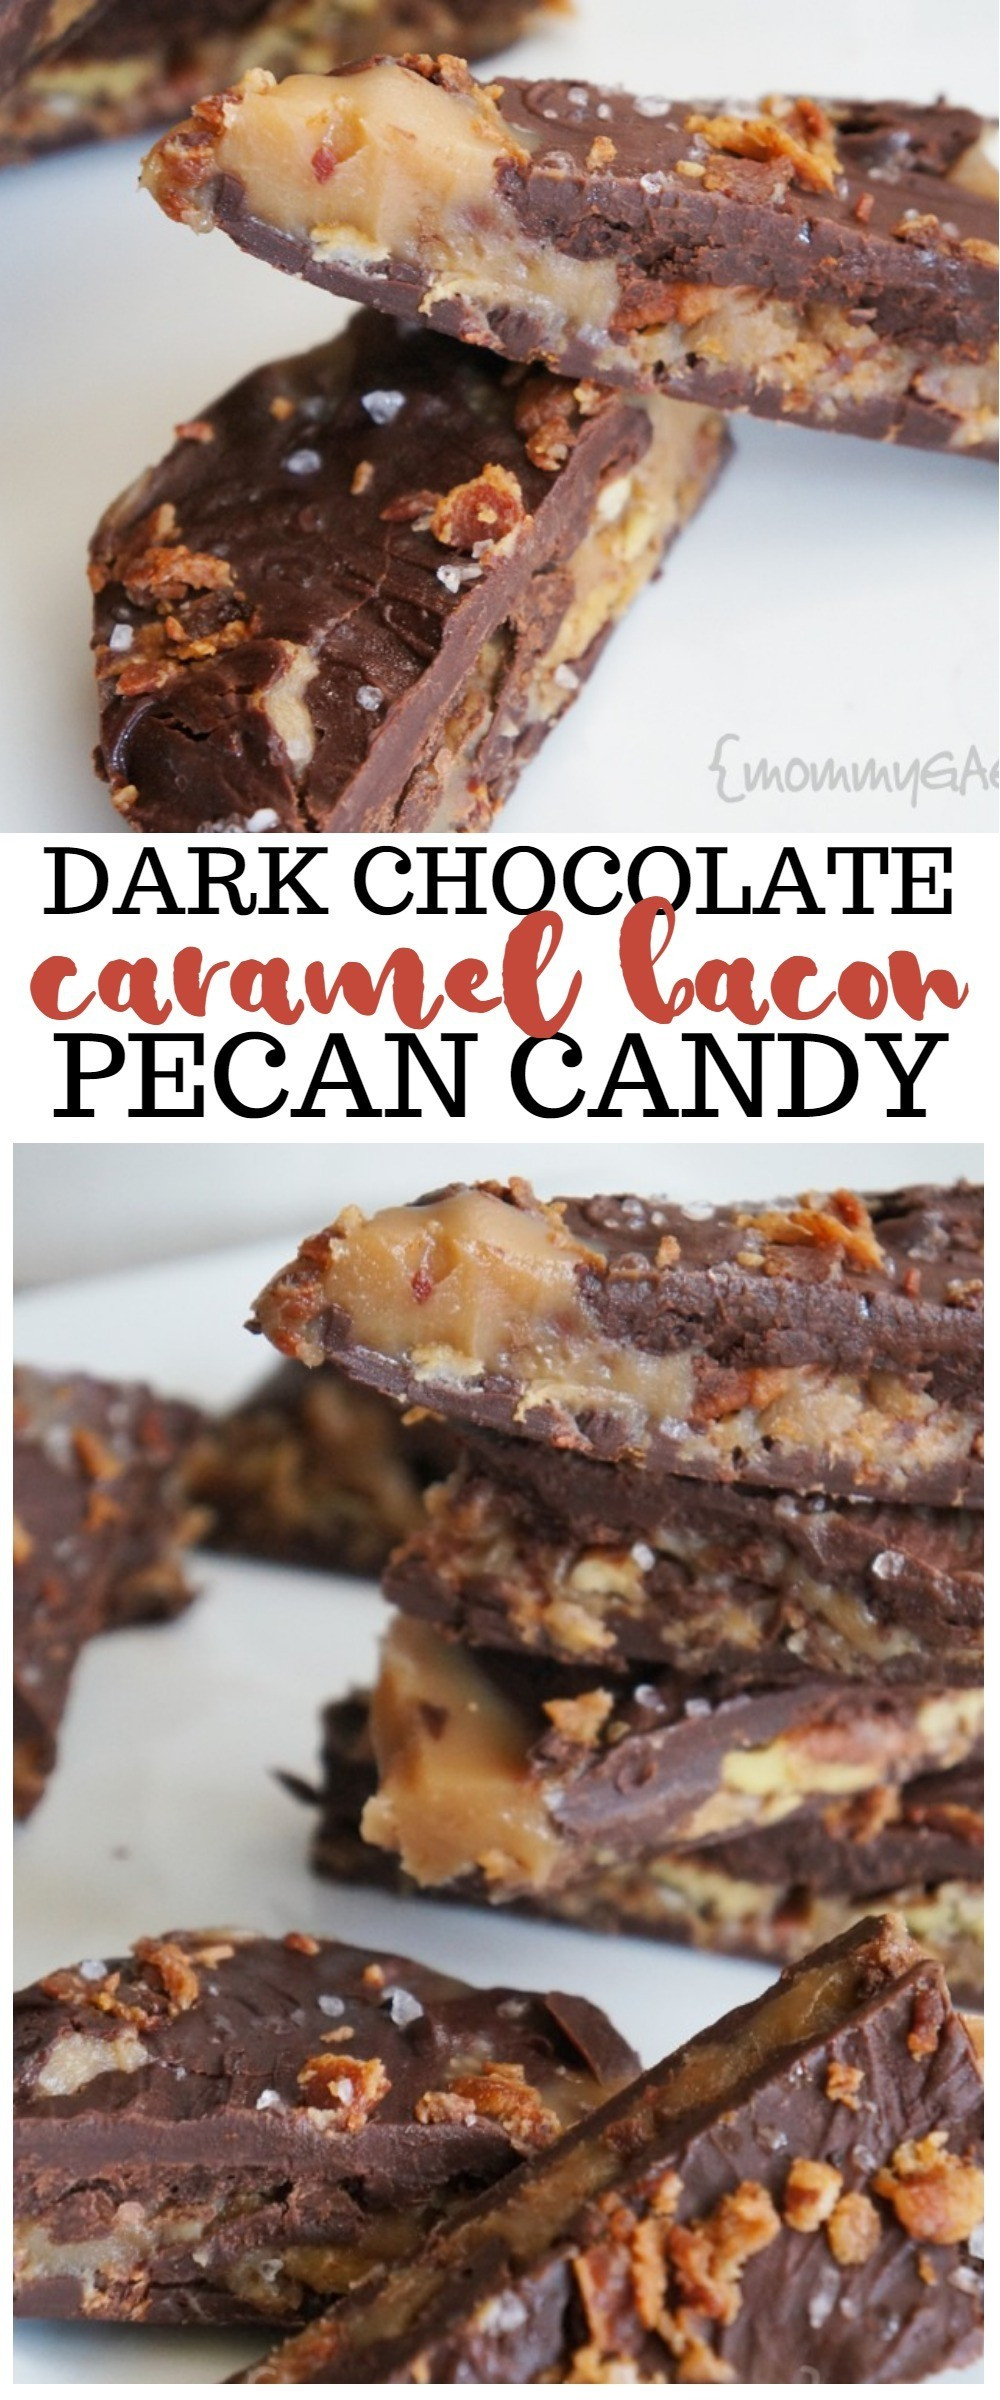 Bacon Candy Recipes
 Dark Chocolate Caramel Pecan Bacon Candy Recipe Is Out